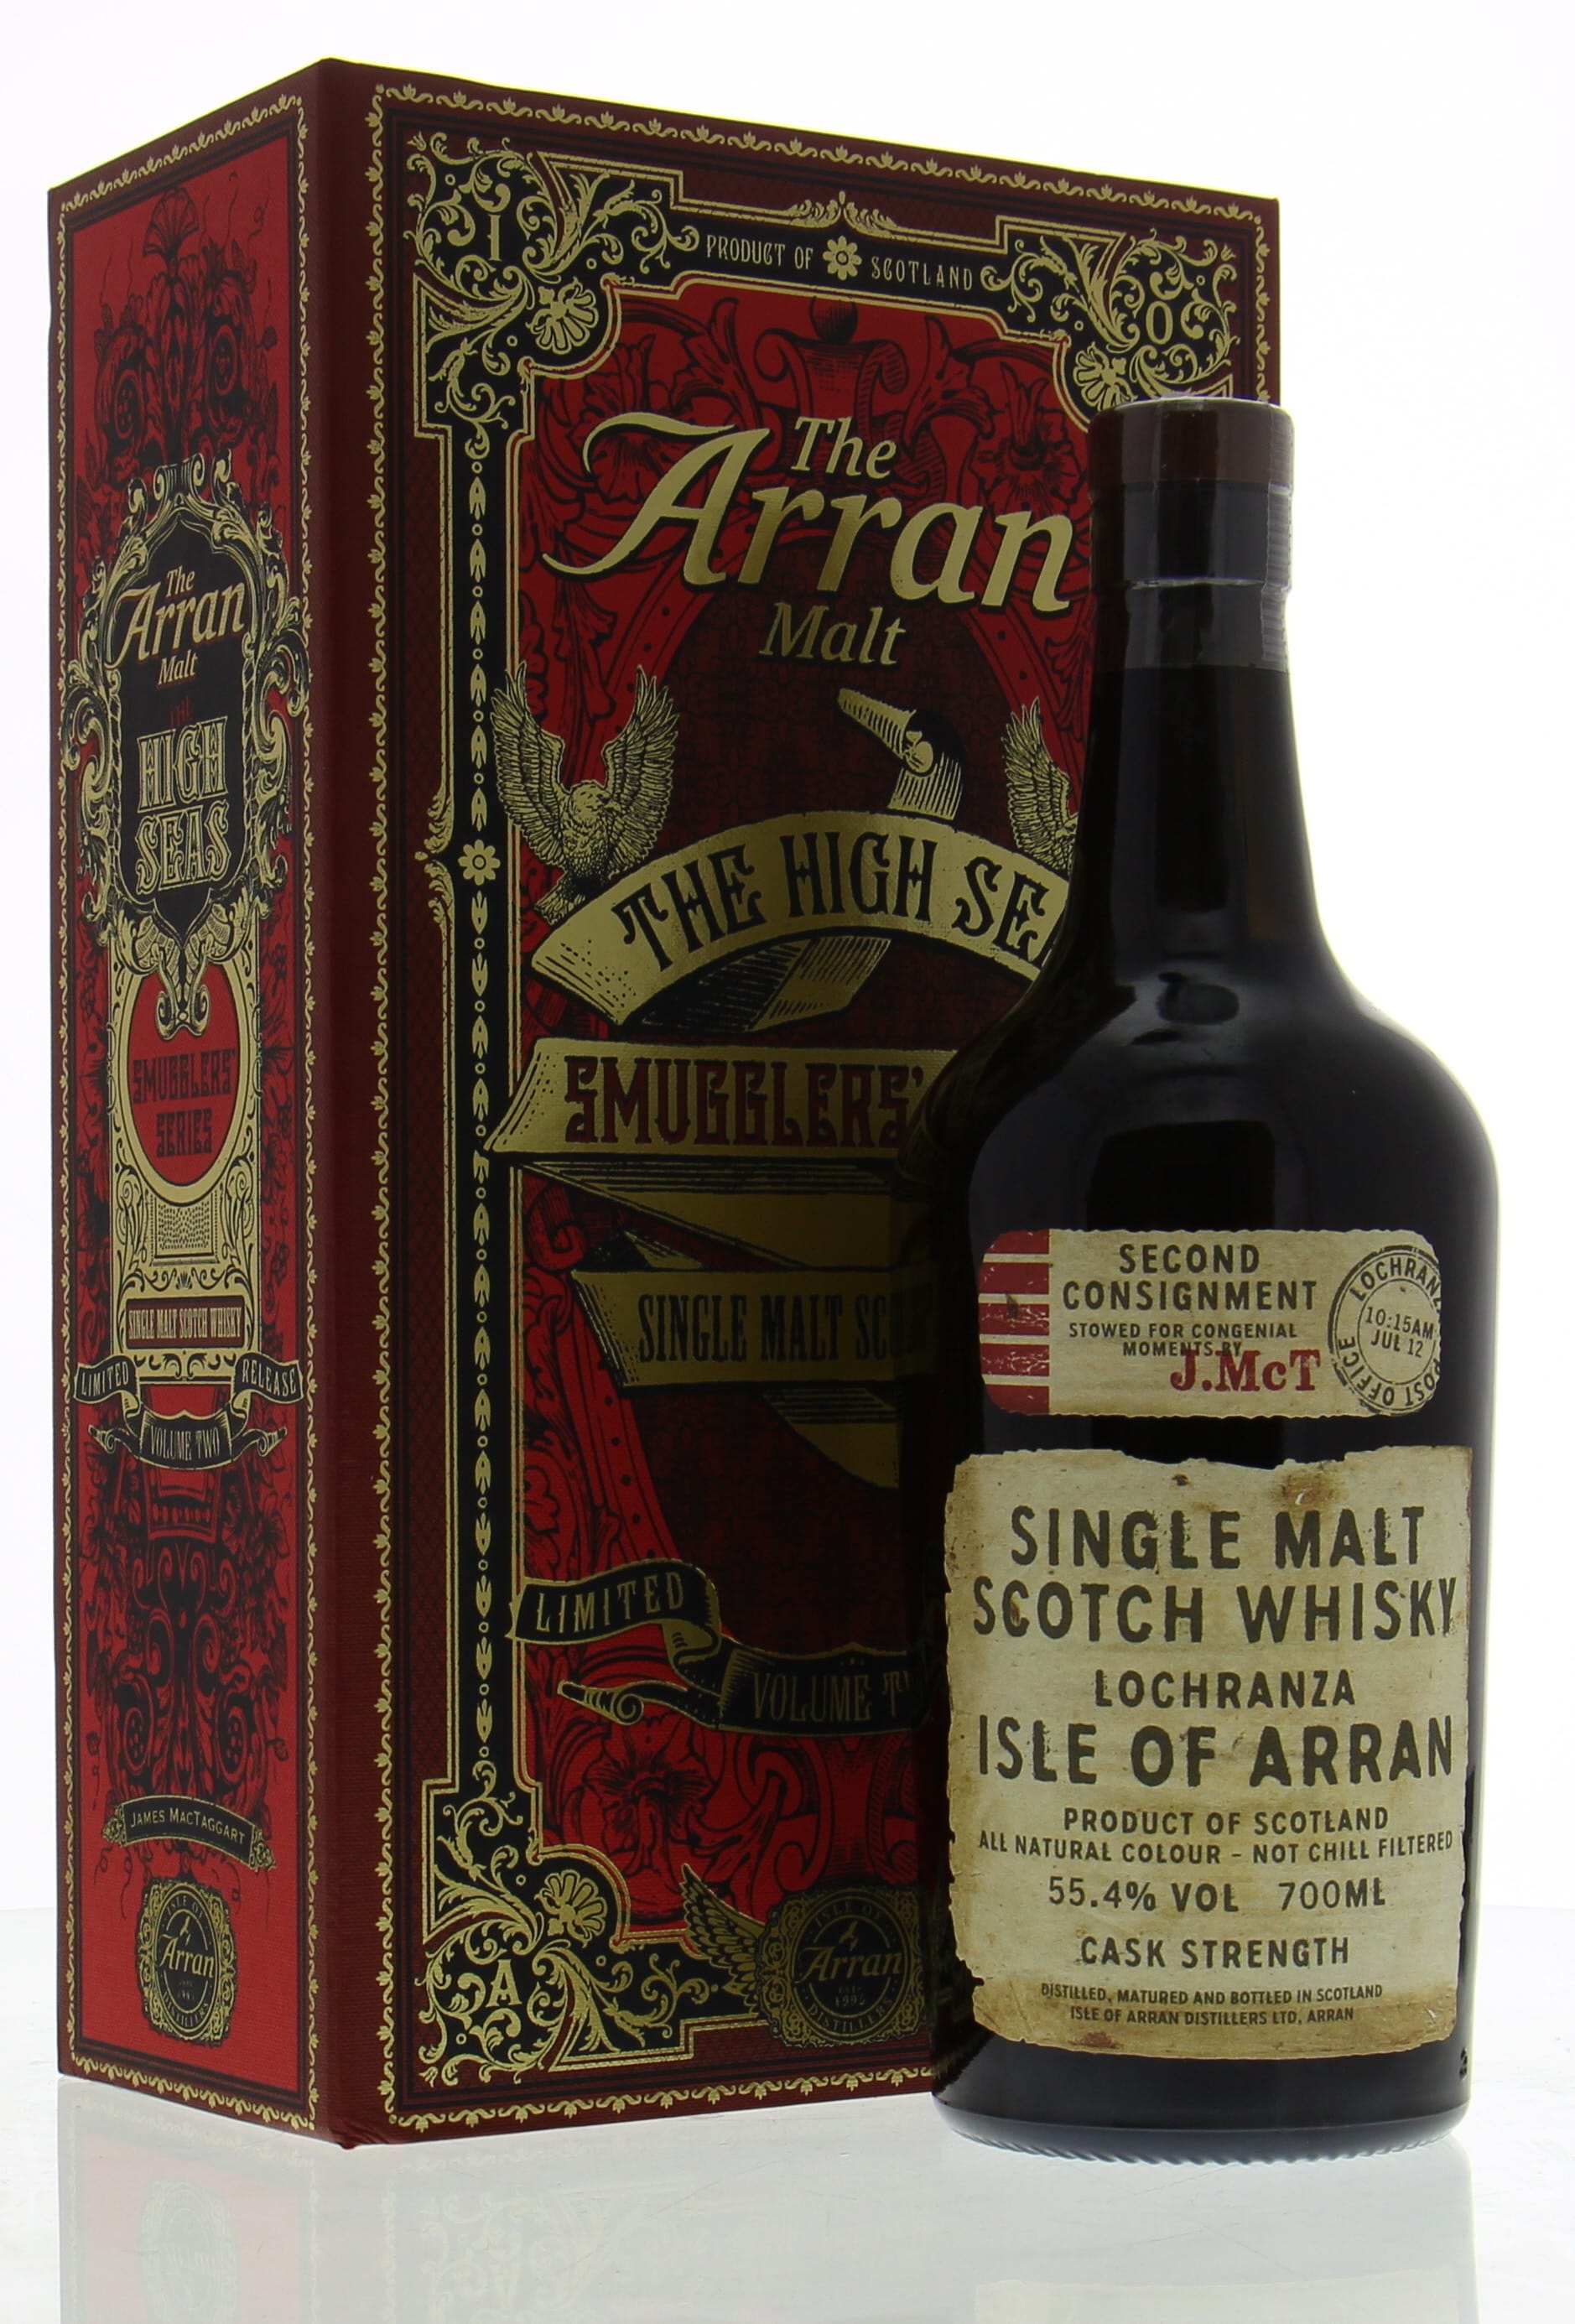 Arran - The High Seas Smugglers' Series Vol. 2 Limited Release 55,4% NV